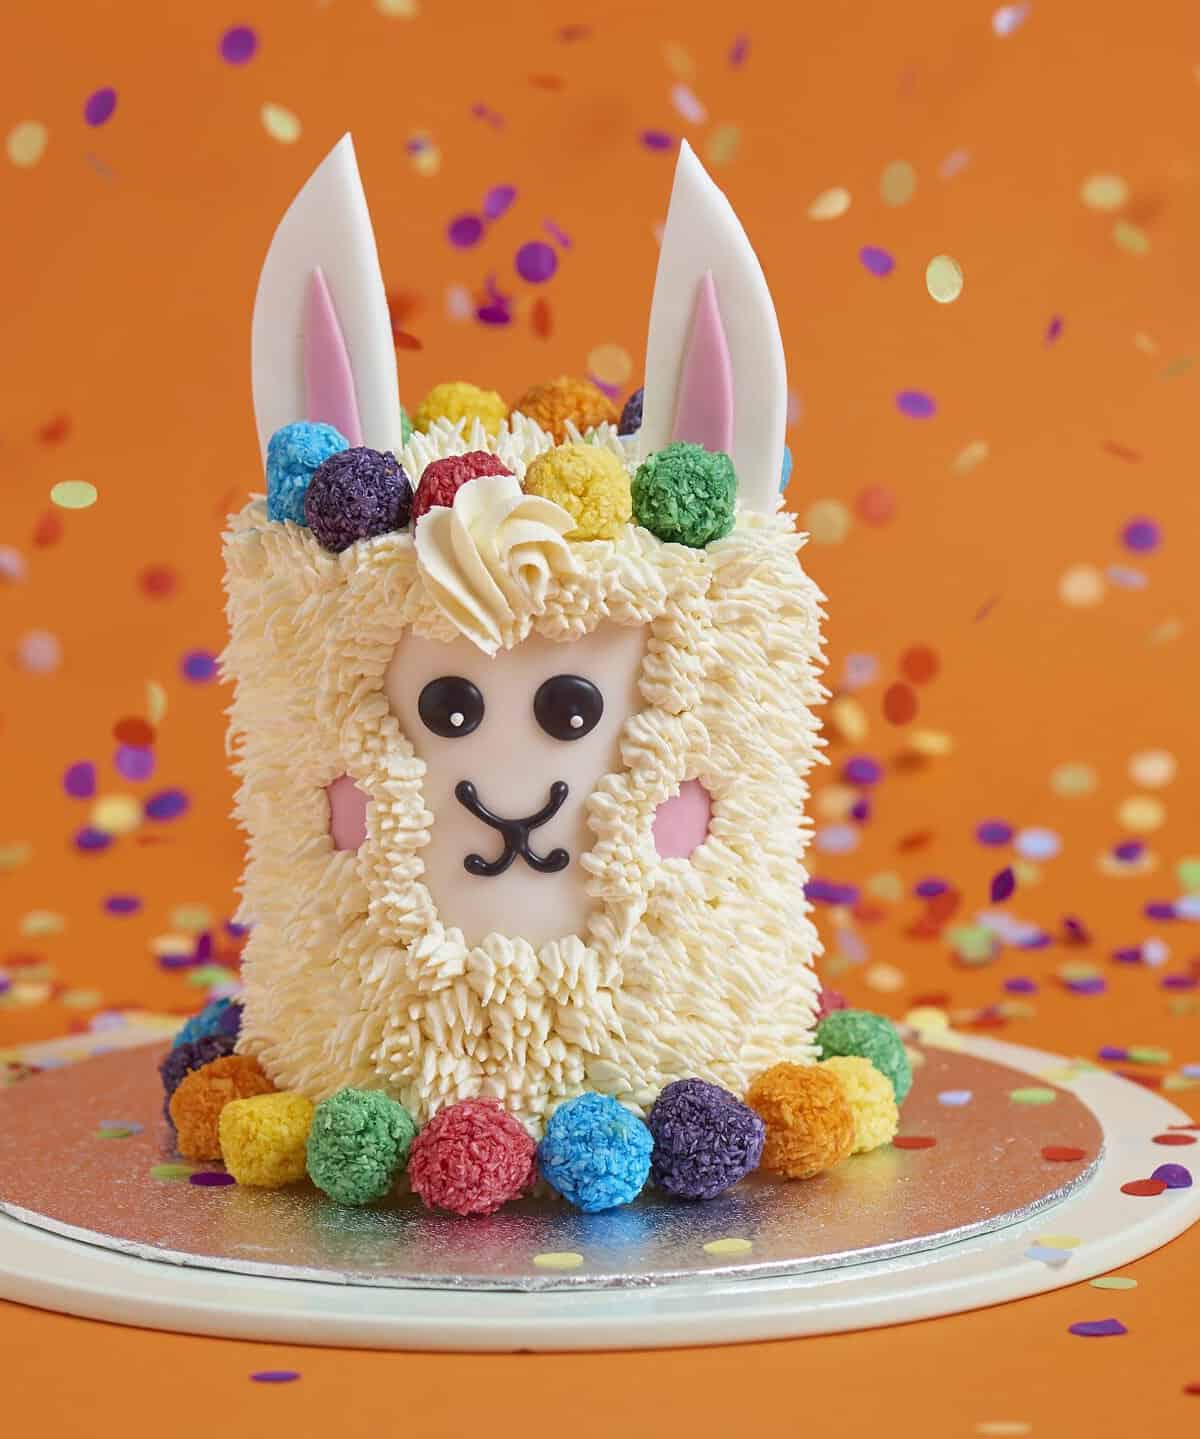  Take a break and treat yourself to a scrumptious slice of our Dulce De Leche Llama Cake.